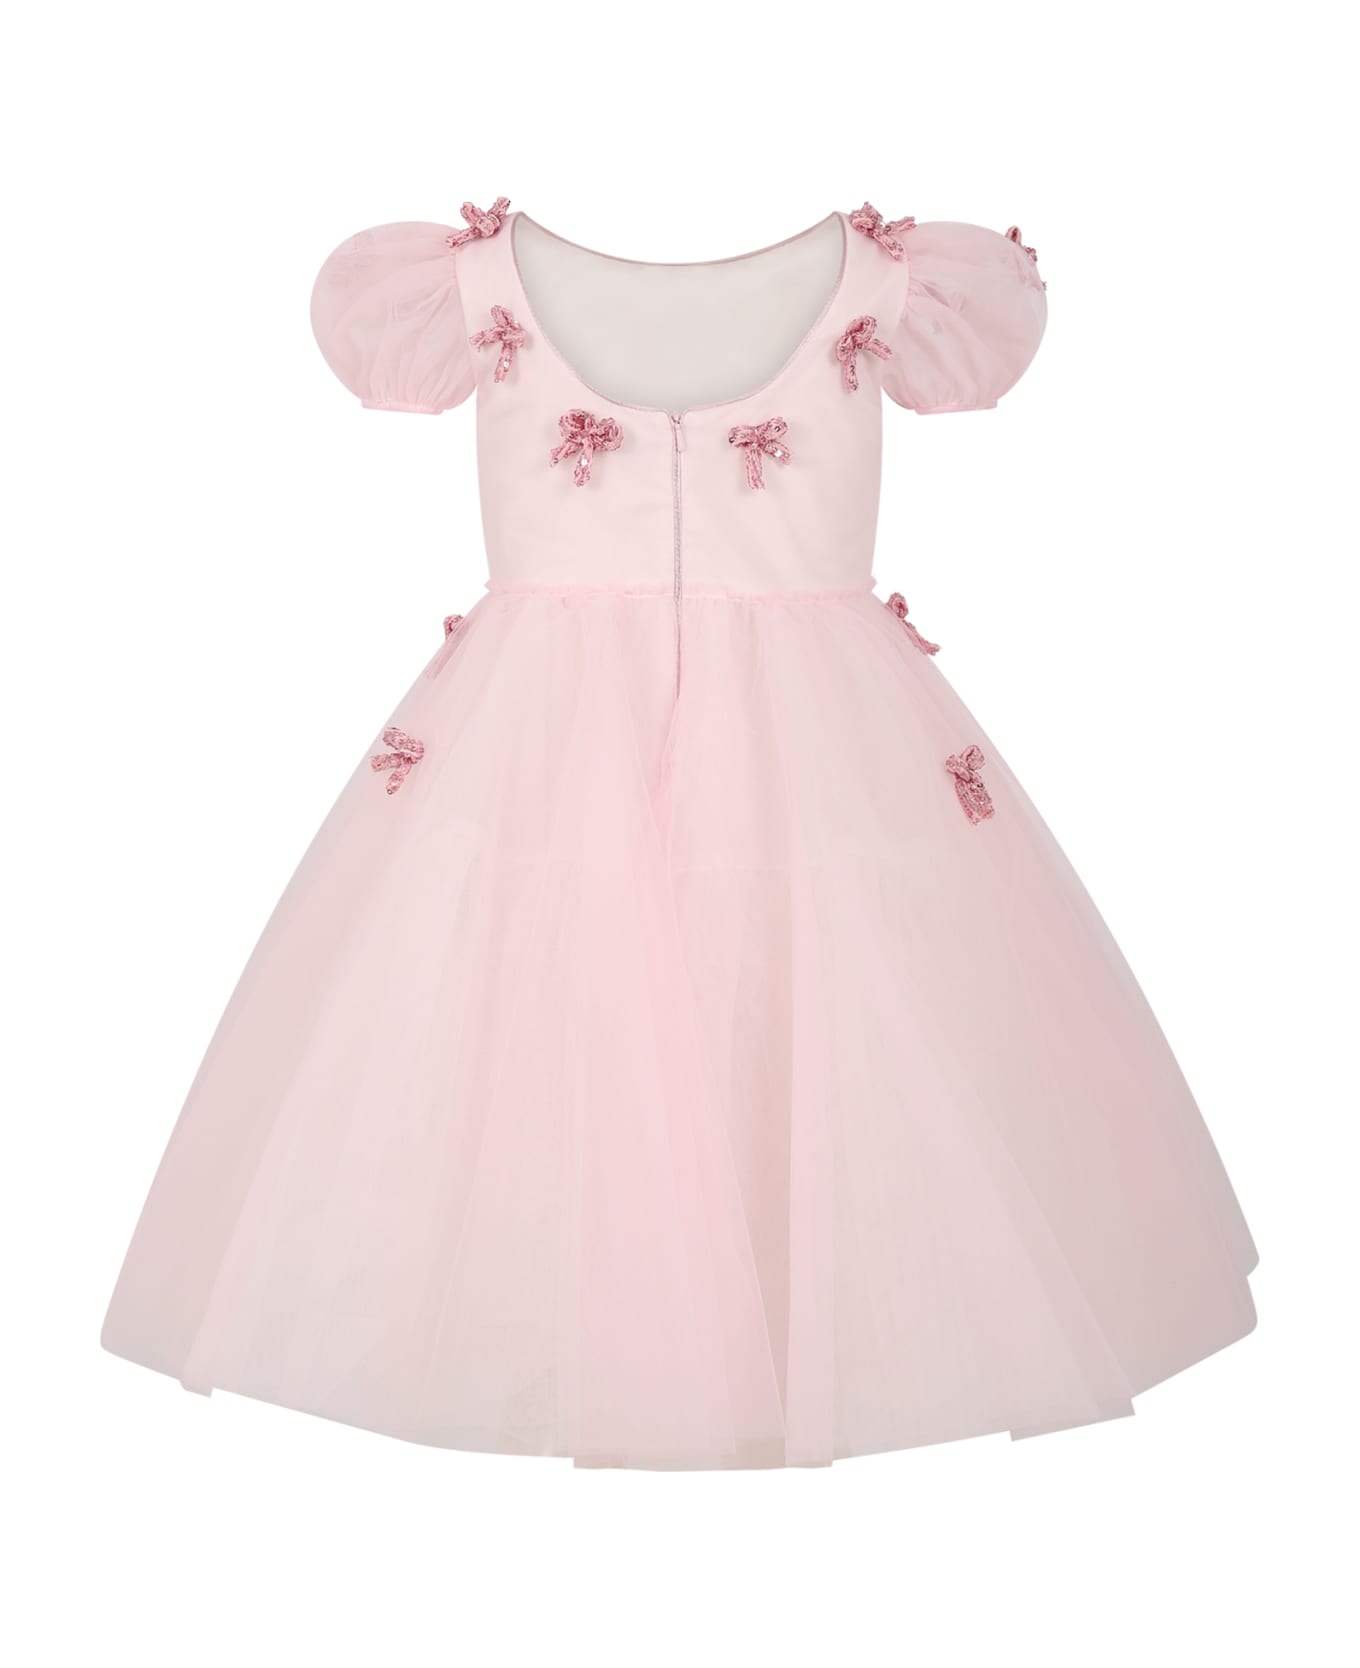 Monnalisa Pink Dress For Girl With Bows - Pink